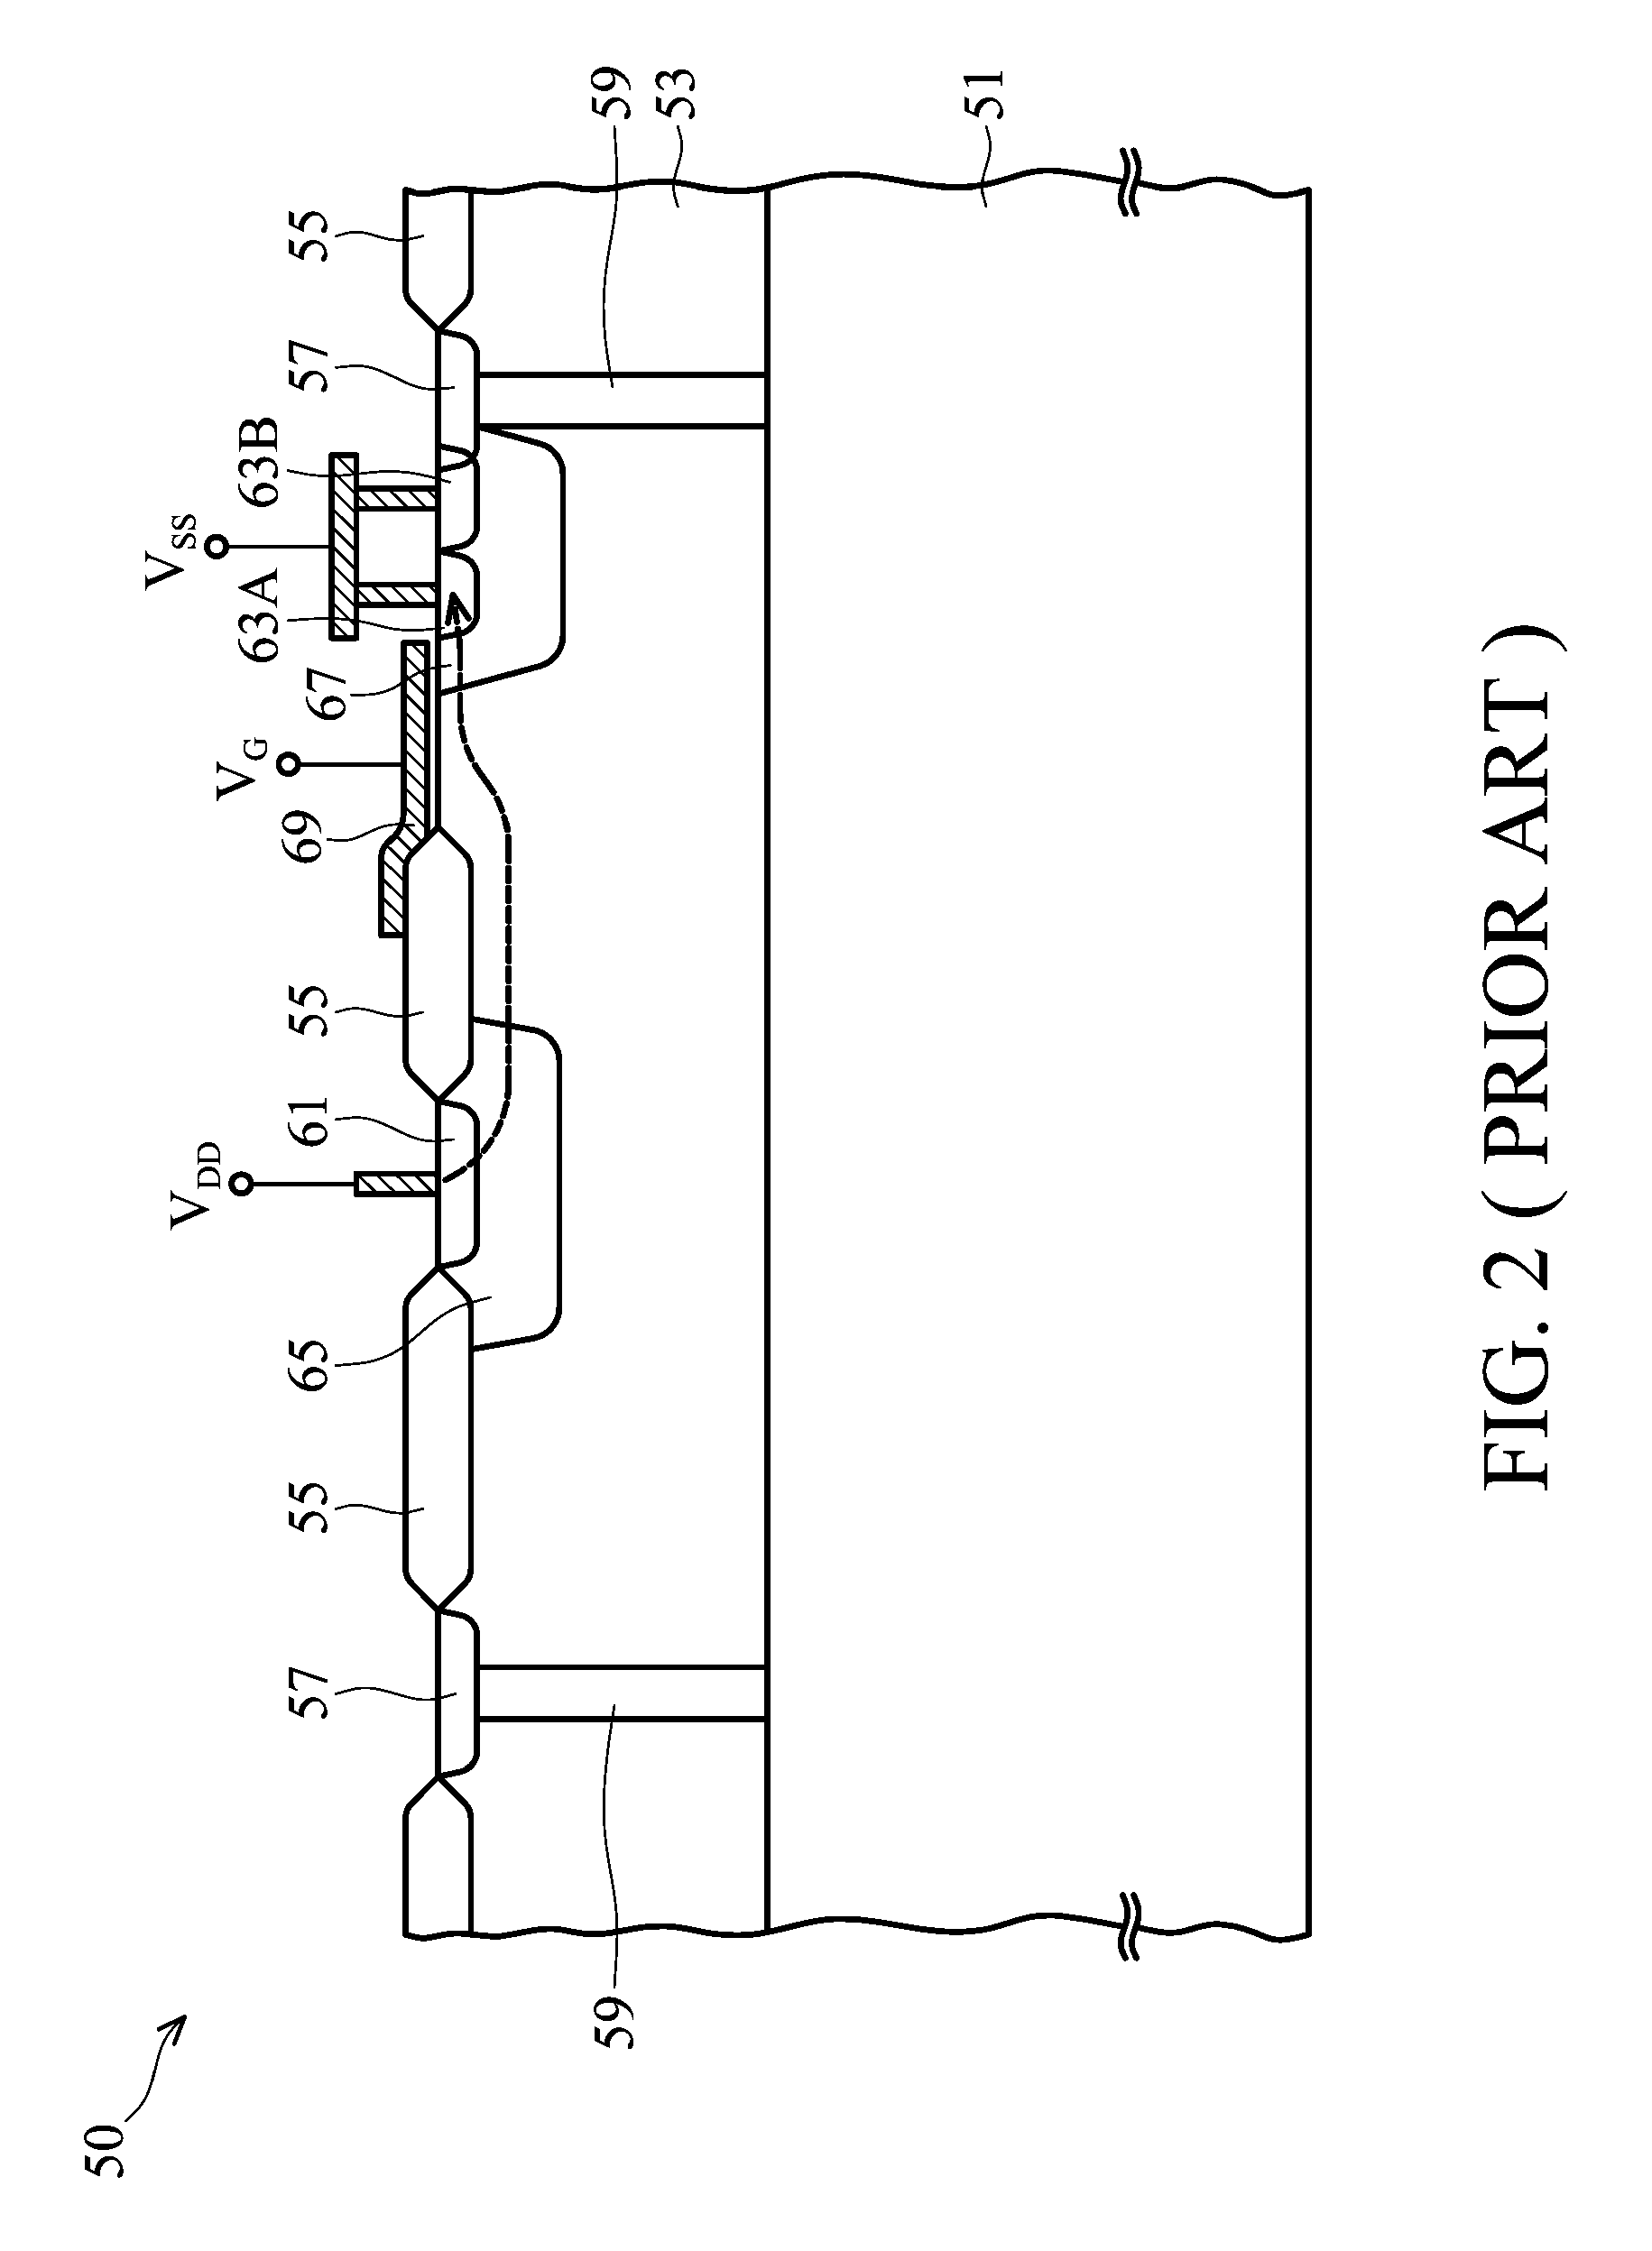 Semiconductor devices for high power application